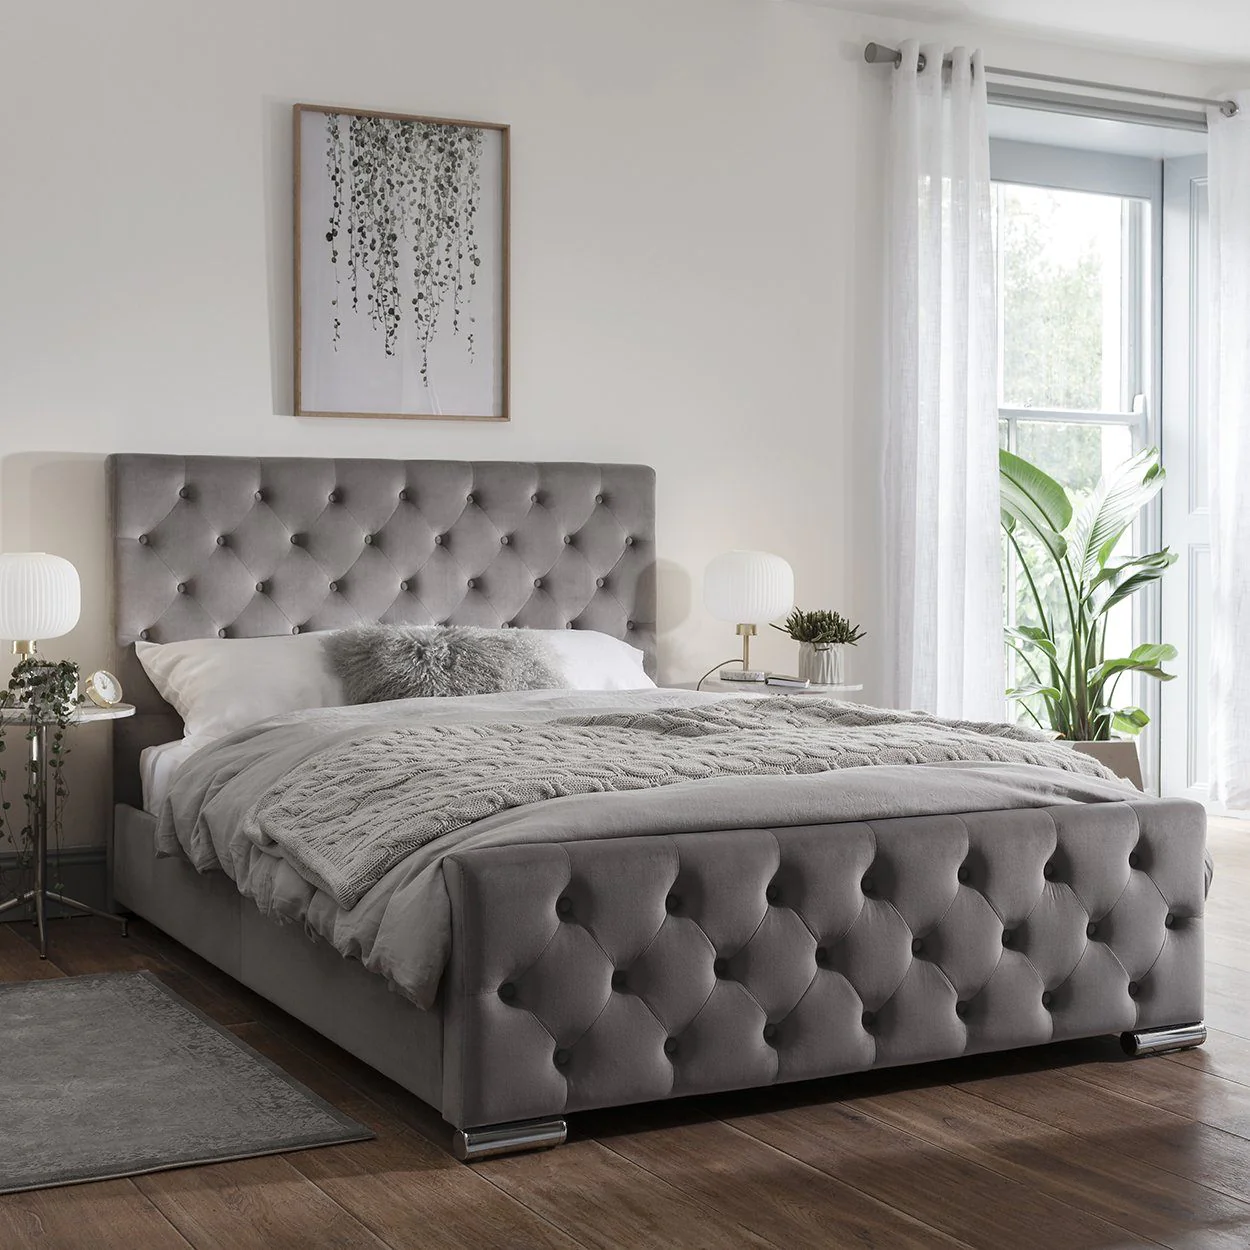 grey modern wood double bed design in a bedroom with a rug and wooden floors